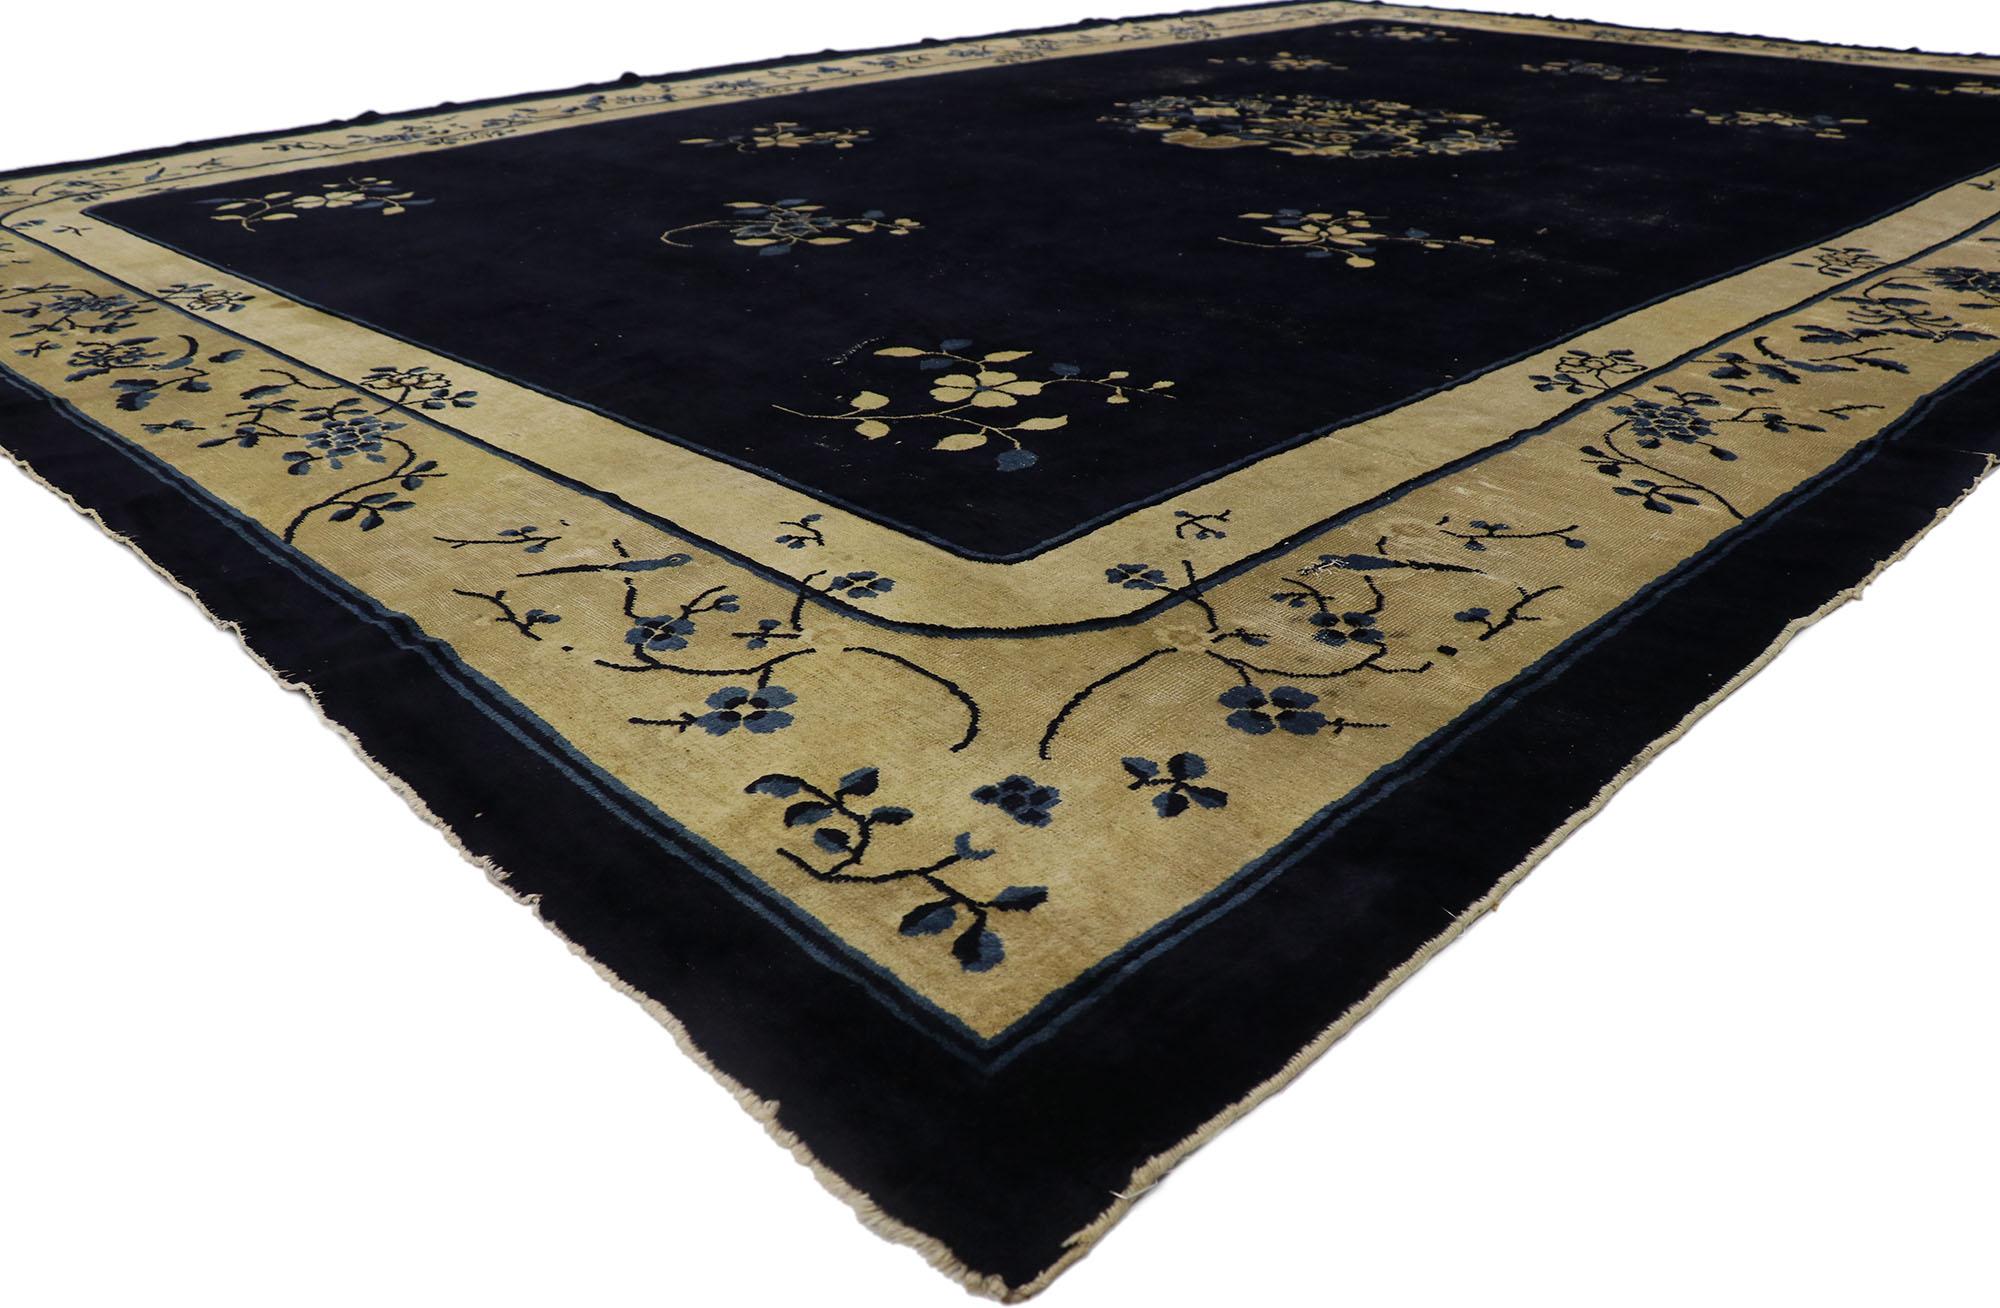 78131 Distressed Antique Chinese peking rug with Rustic Chinoiserie Style 12'02 x 18'02. This hand knotted wool antique Chinese Peking rug features a rounded open medallion decorated with a large open lotus blossom, peonies, and leafy tendrils